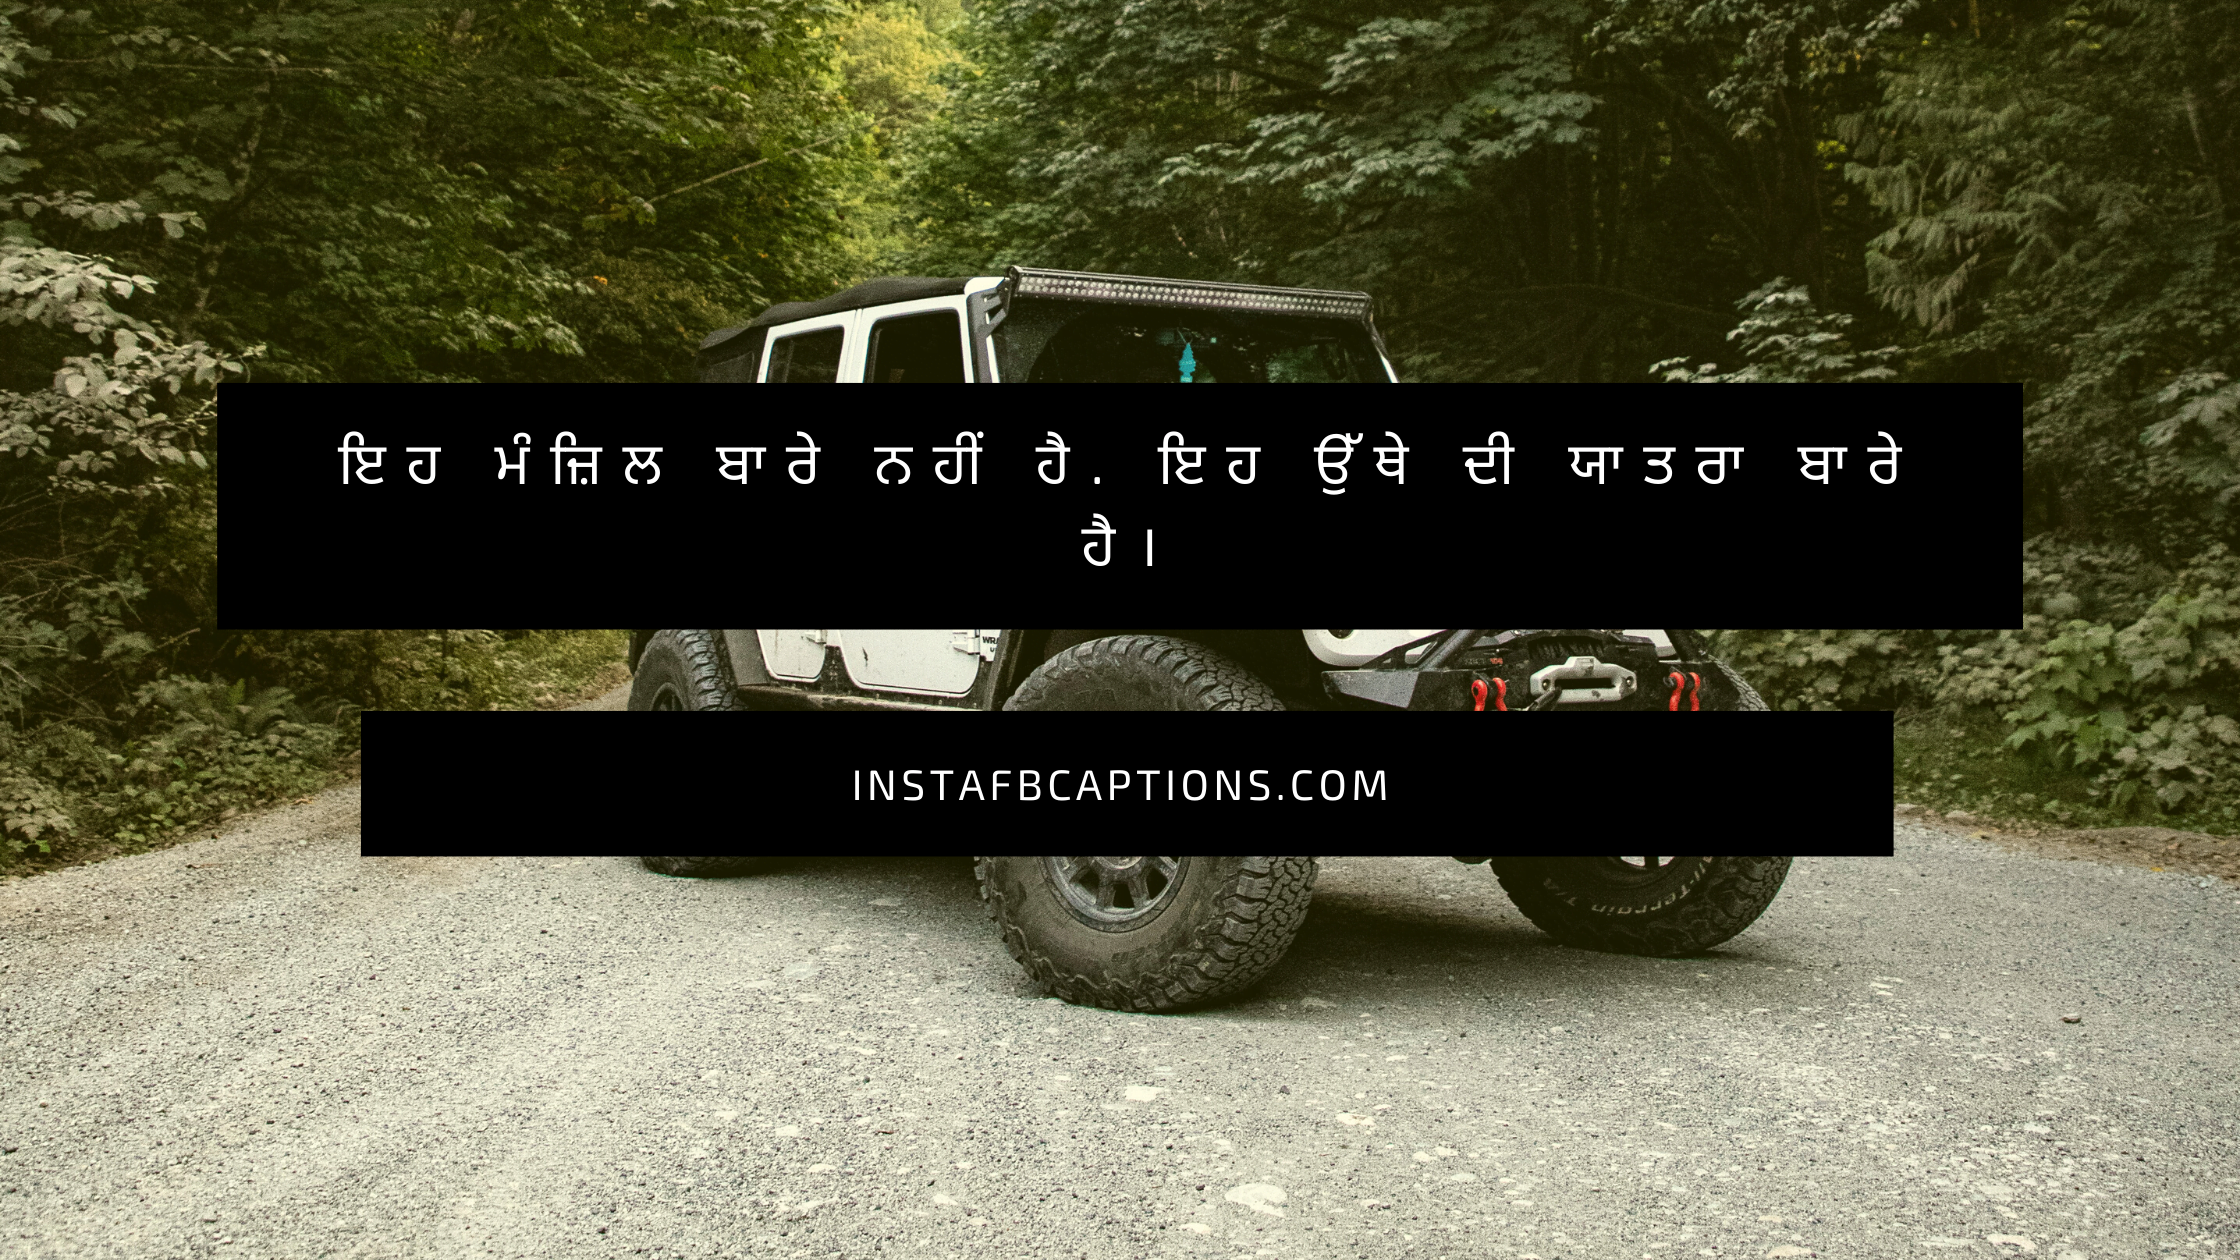 Punjabi Jeep Captions  - Punjabi Jeep Captions  - 92 Jeep Instagram Captions Quotes for 2022